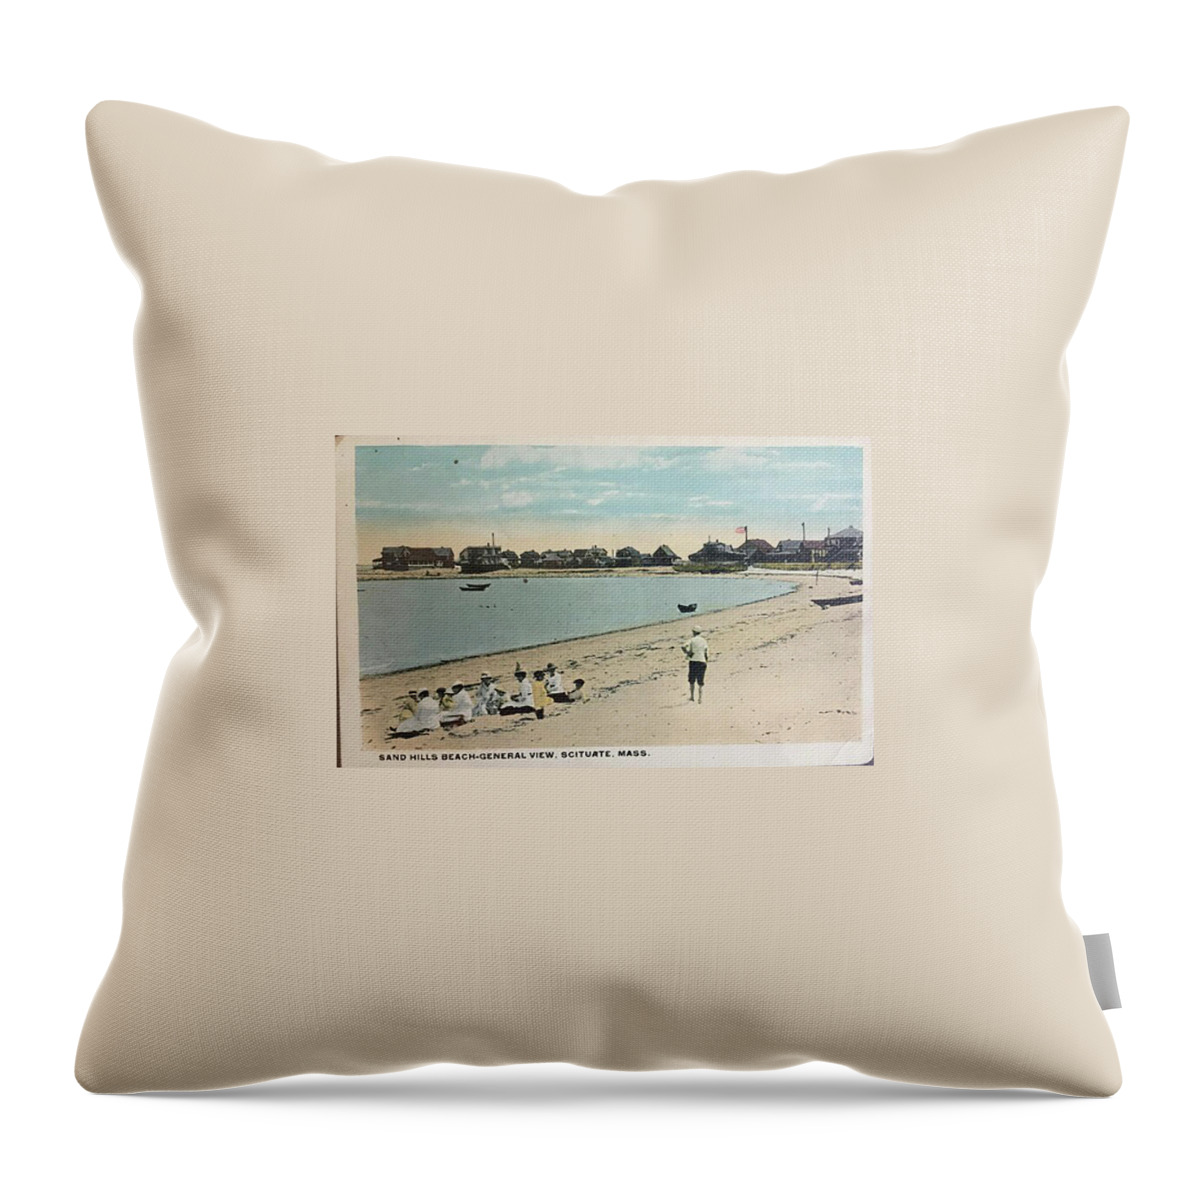  Throw Pillow featuring the digital art Scituate5 by Cindy Greenstein